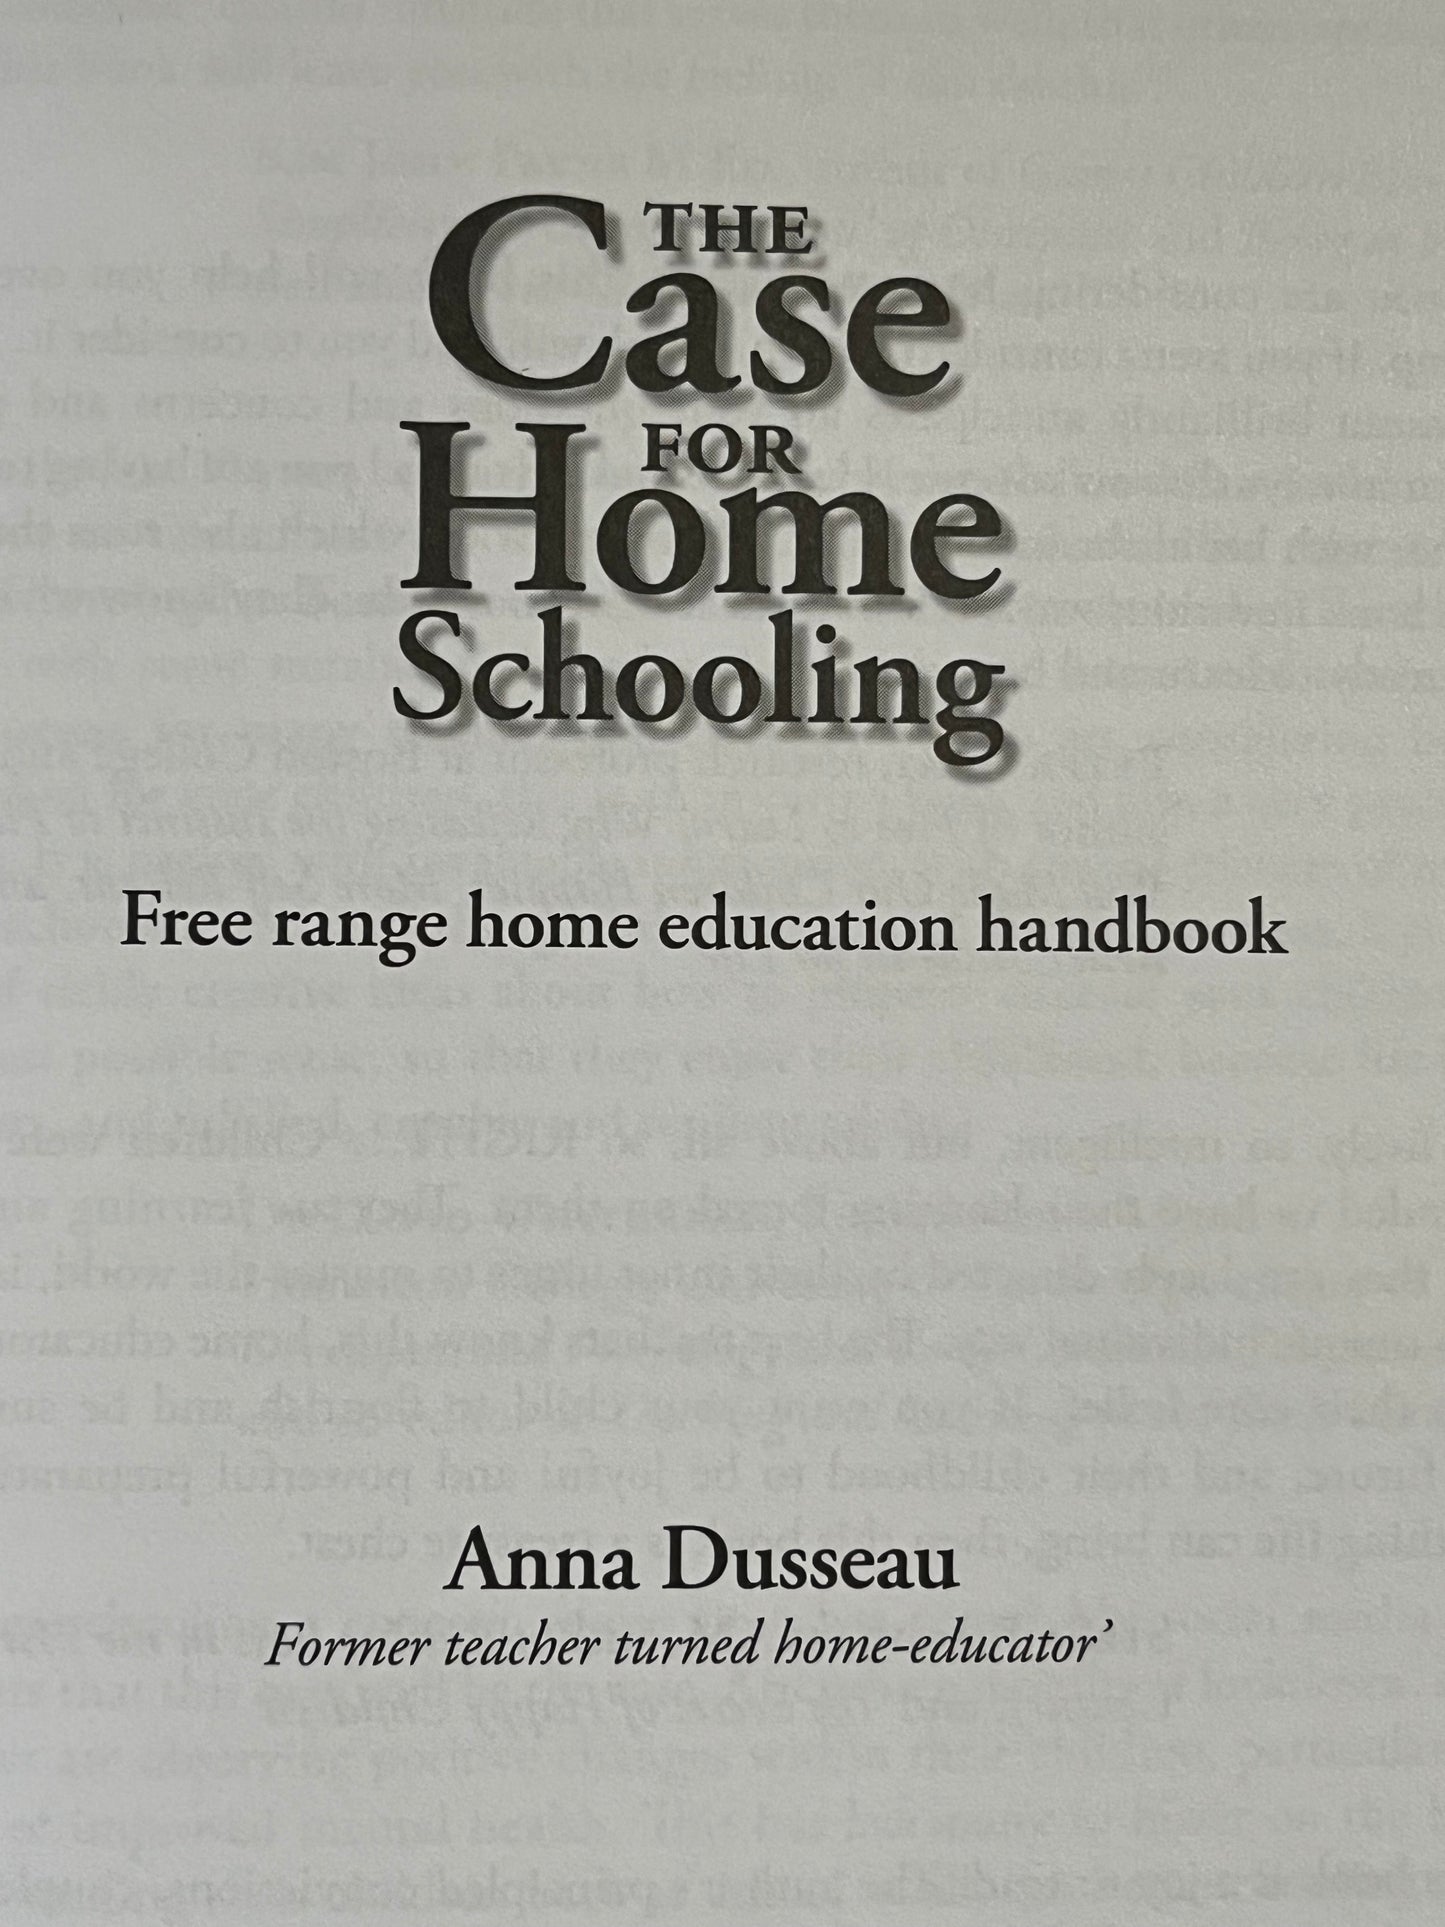 Parenting Resource Book - THE CASE FOR HOMESCHOOLING